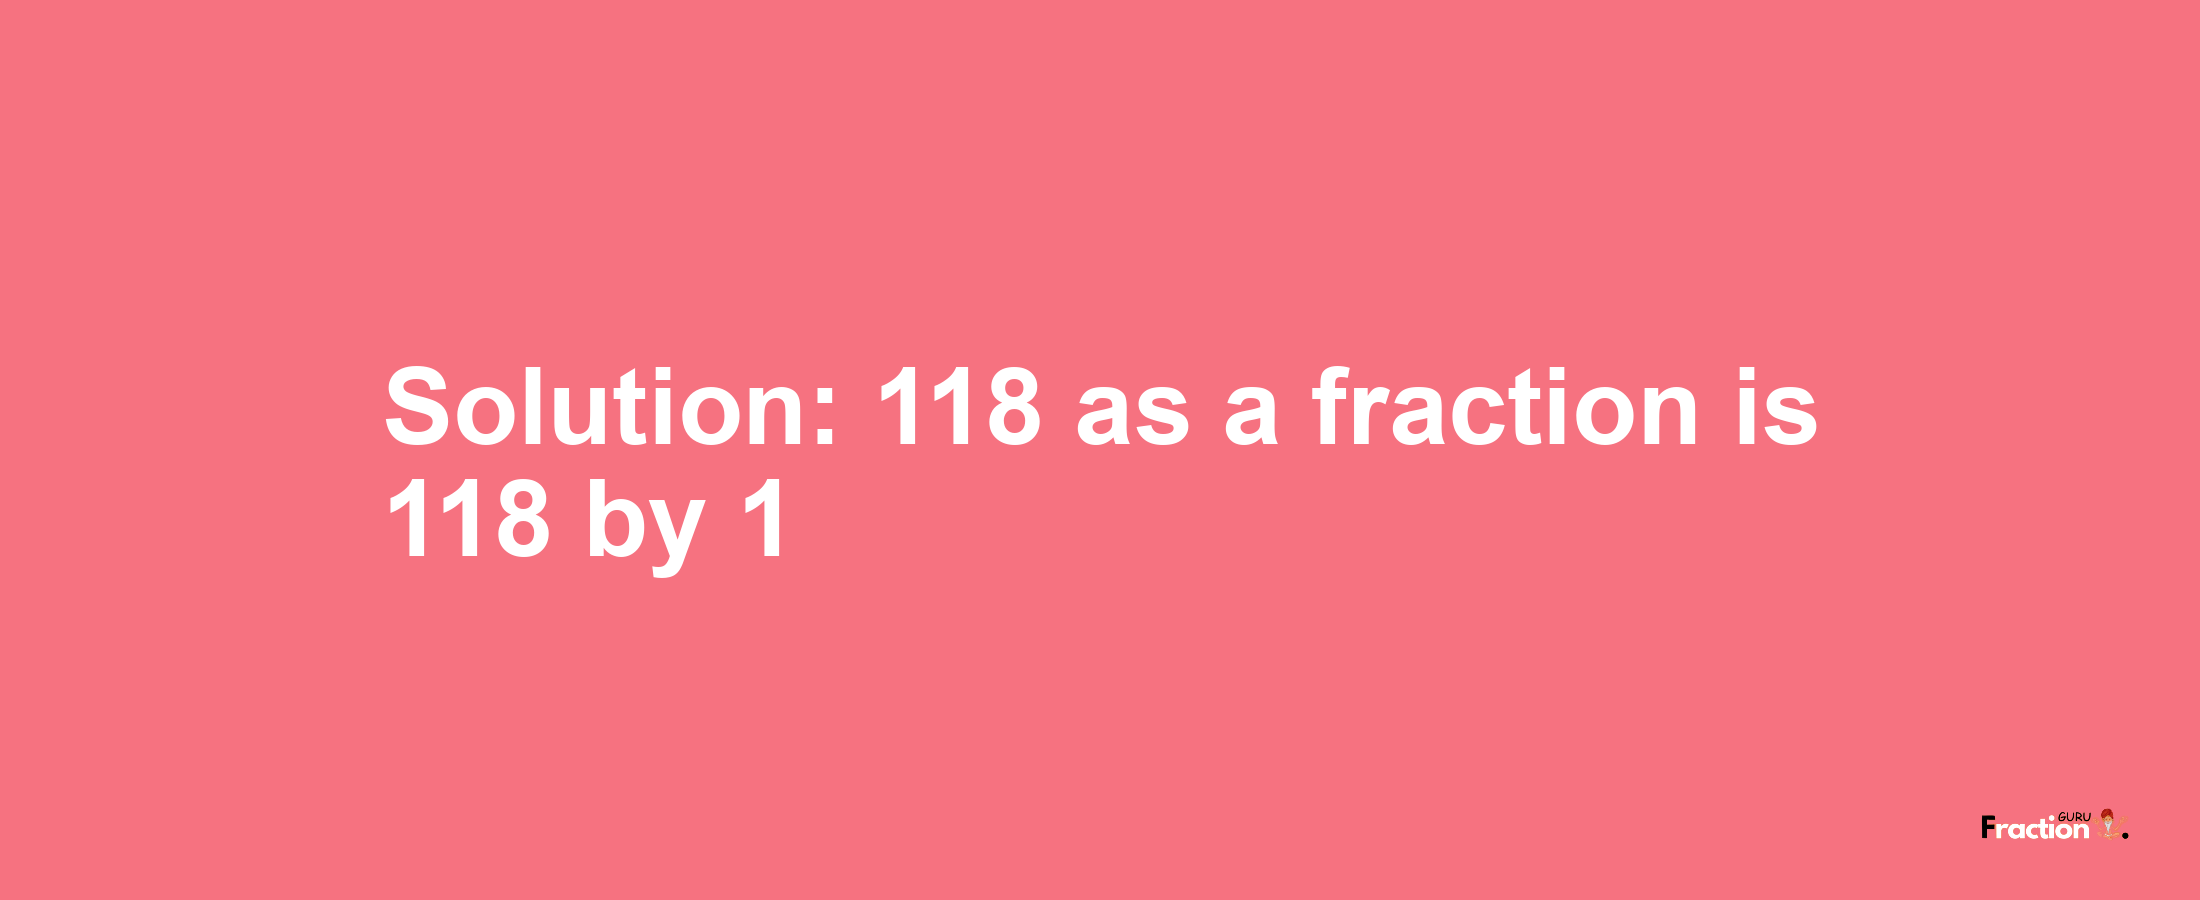 Solution:118 as a fraction is 118/1